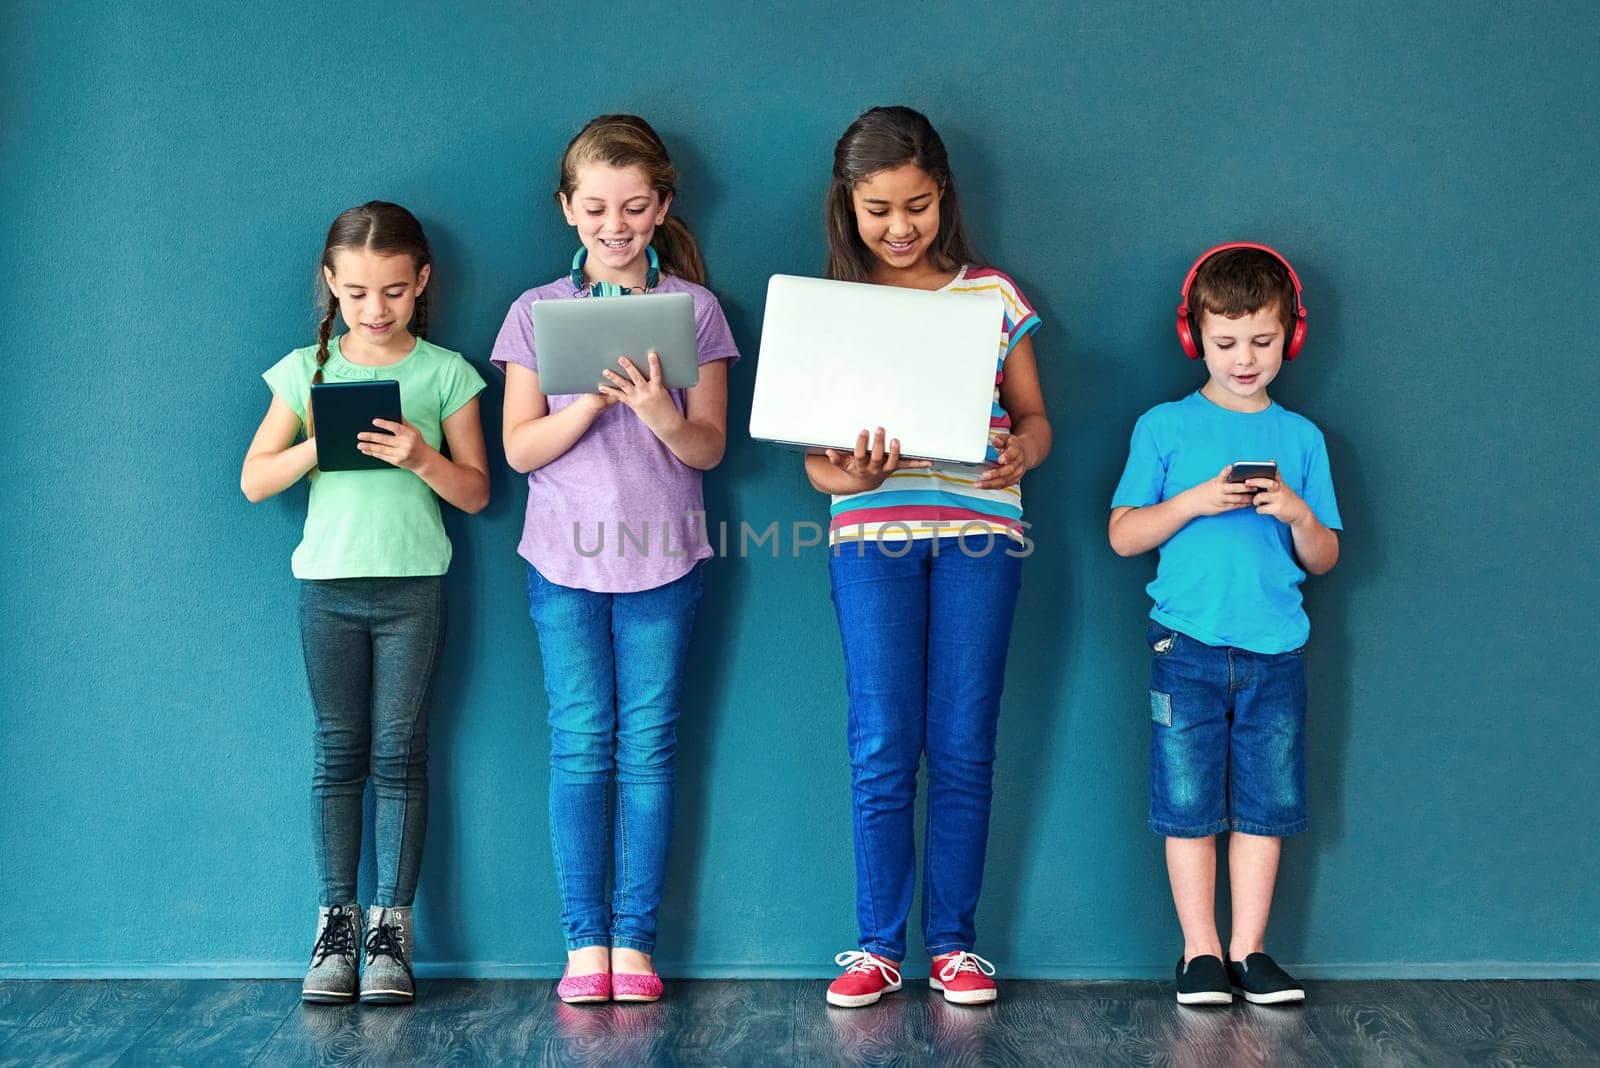 Leaving wireless technology in the hands of kids. Studio shot of a group of kids using wireless technology against a blue background. by YuriArcurs